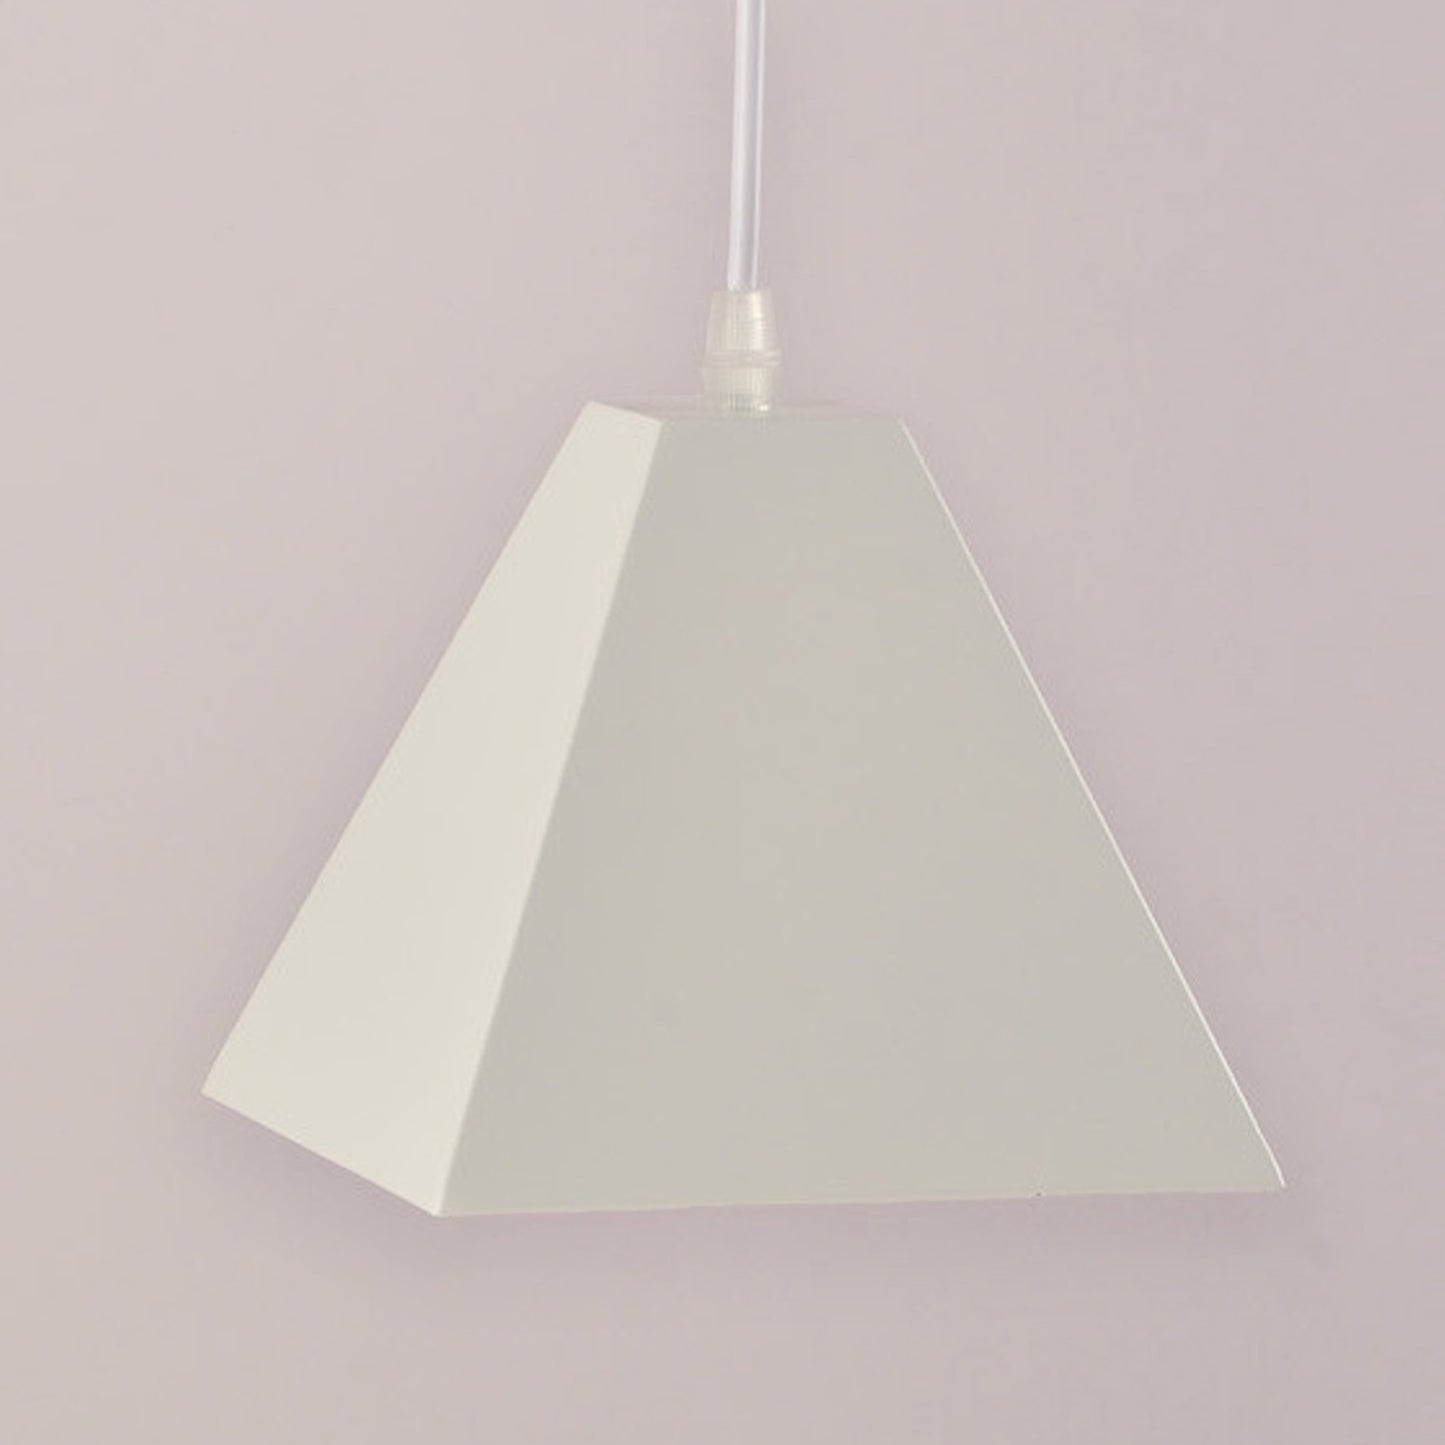 (N) ARTURESTHOME American Industrial Style Creative Pyramid Chandelier